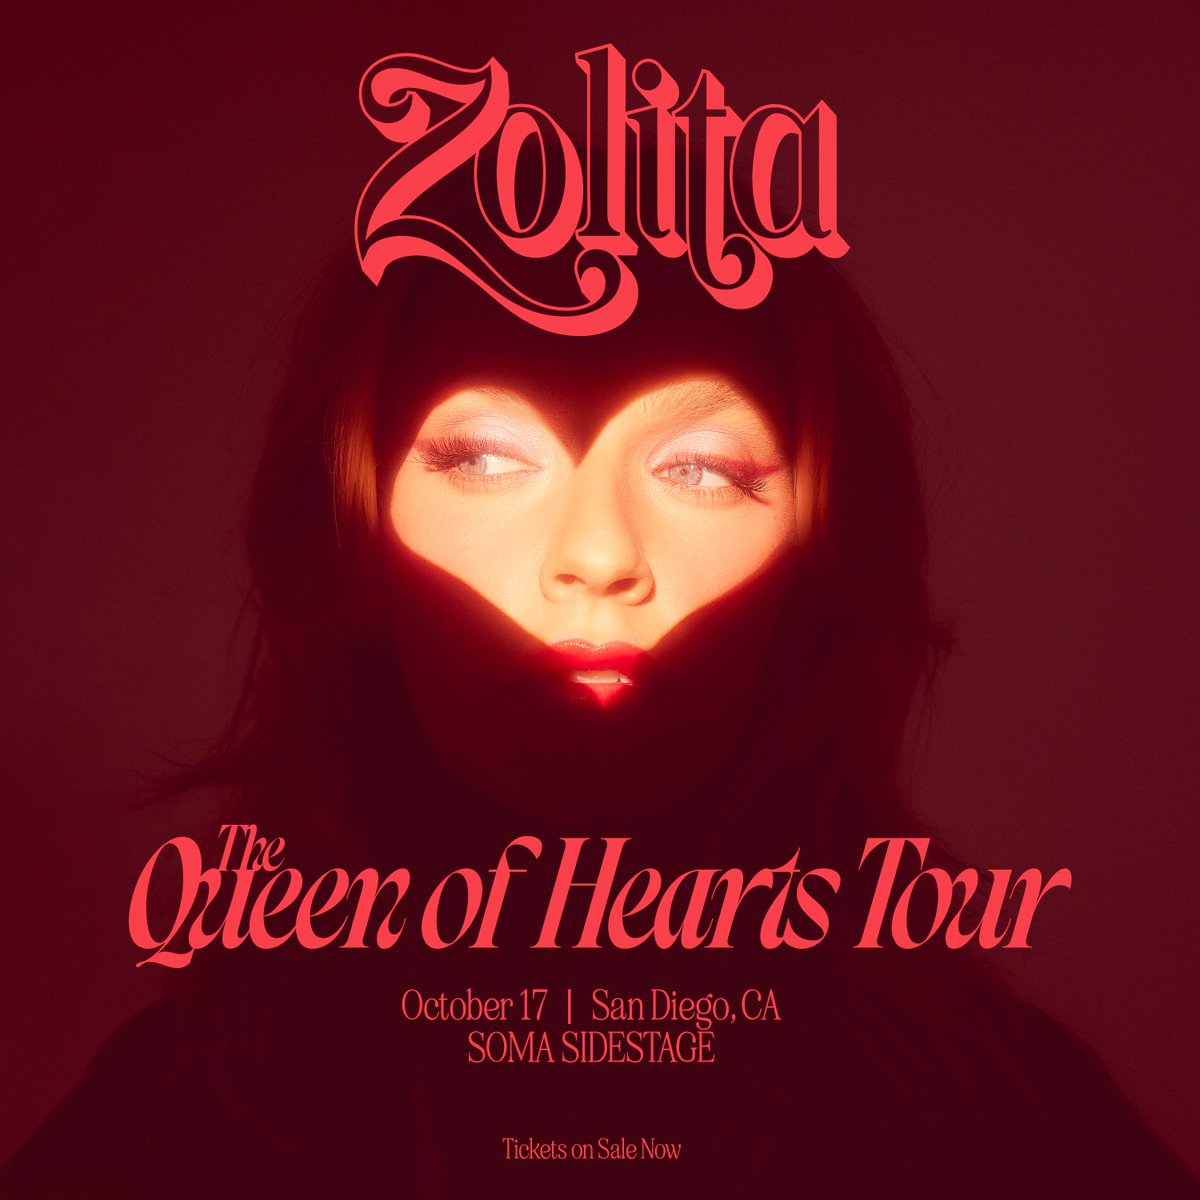 ON SALE NOW 👑 @zolitaofficial — The Queen of Hearts Tour is coming to SOMA on Oct 17th! 🖤 🔗 bit.ly/4azif72